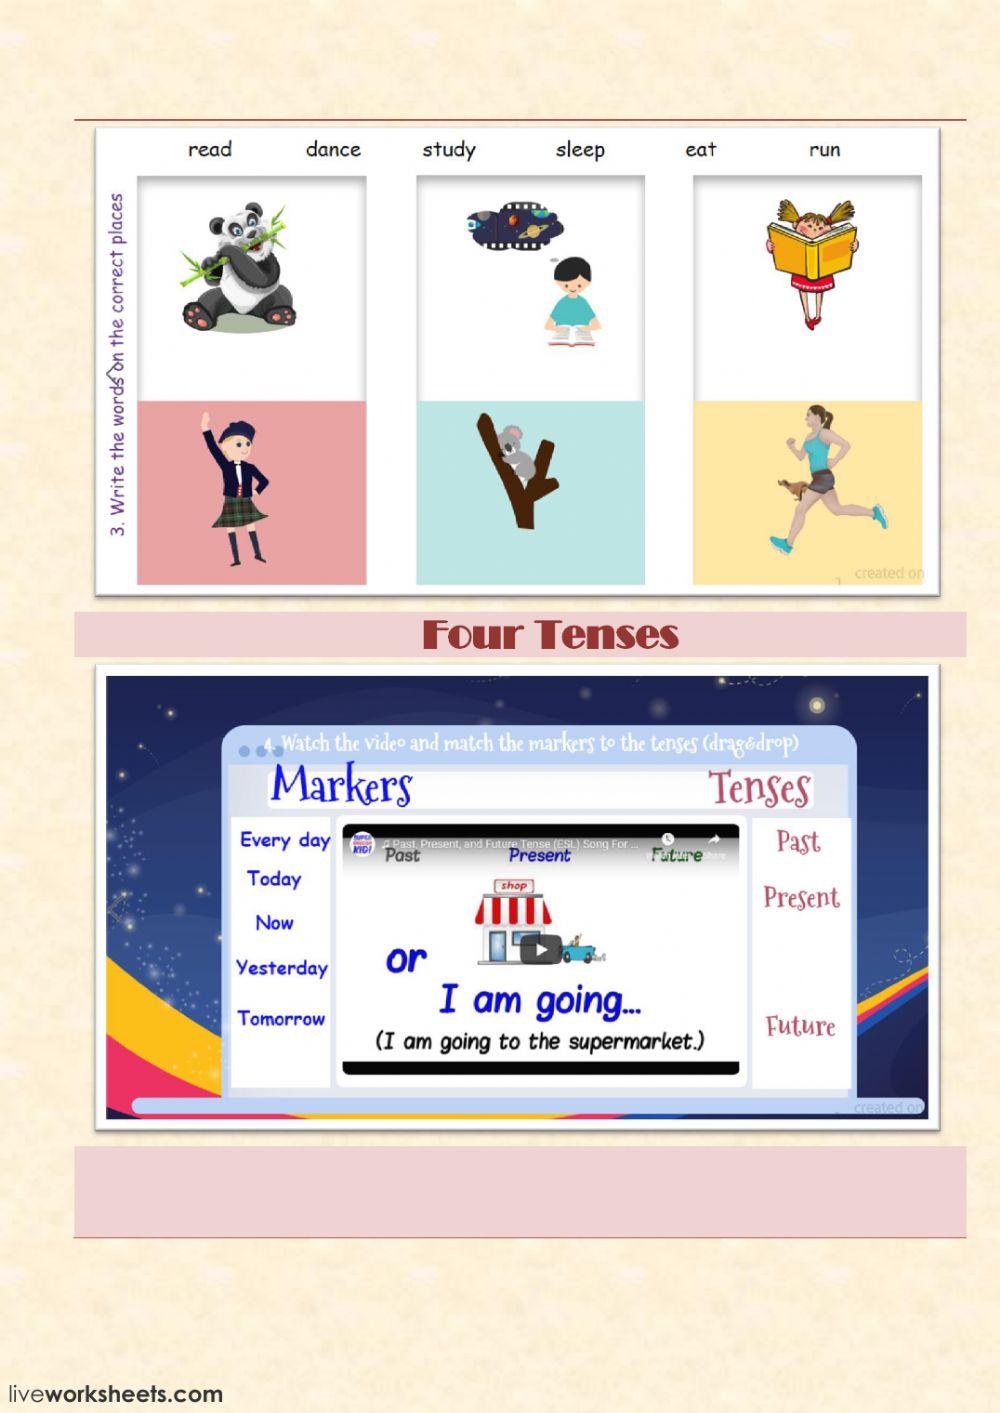 4 Tenses and action verbs review